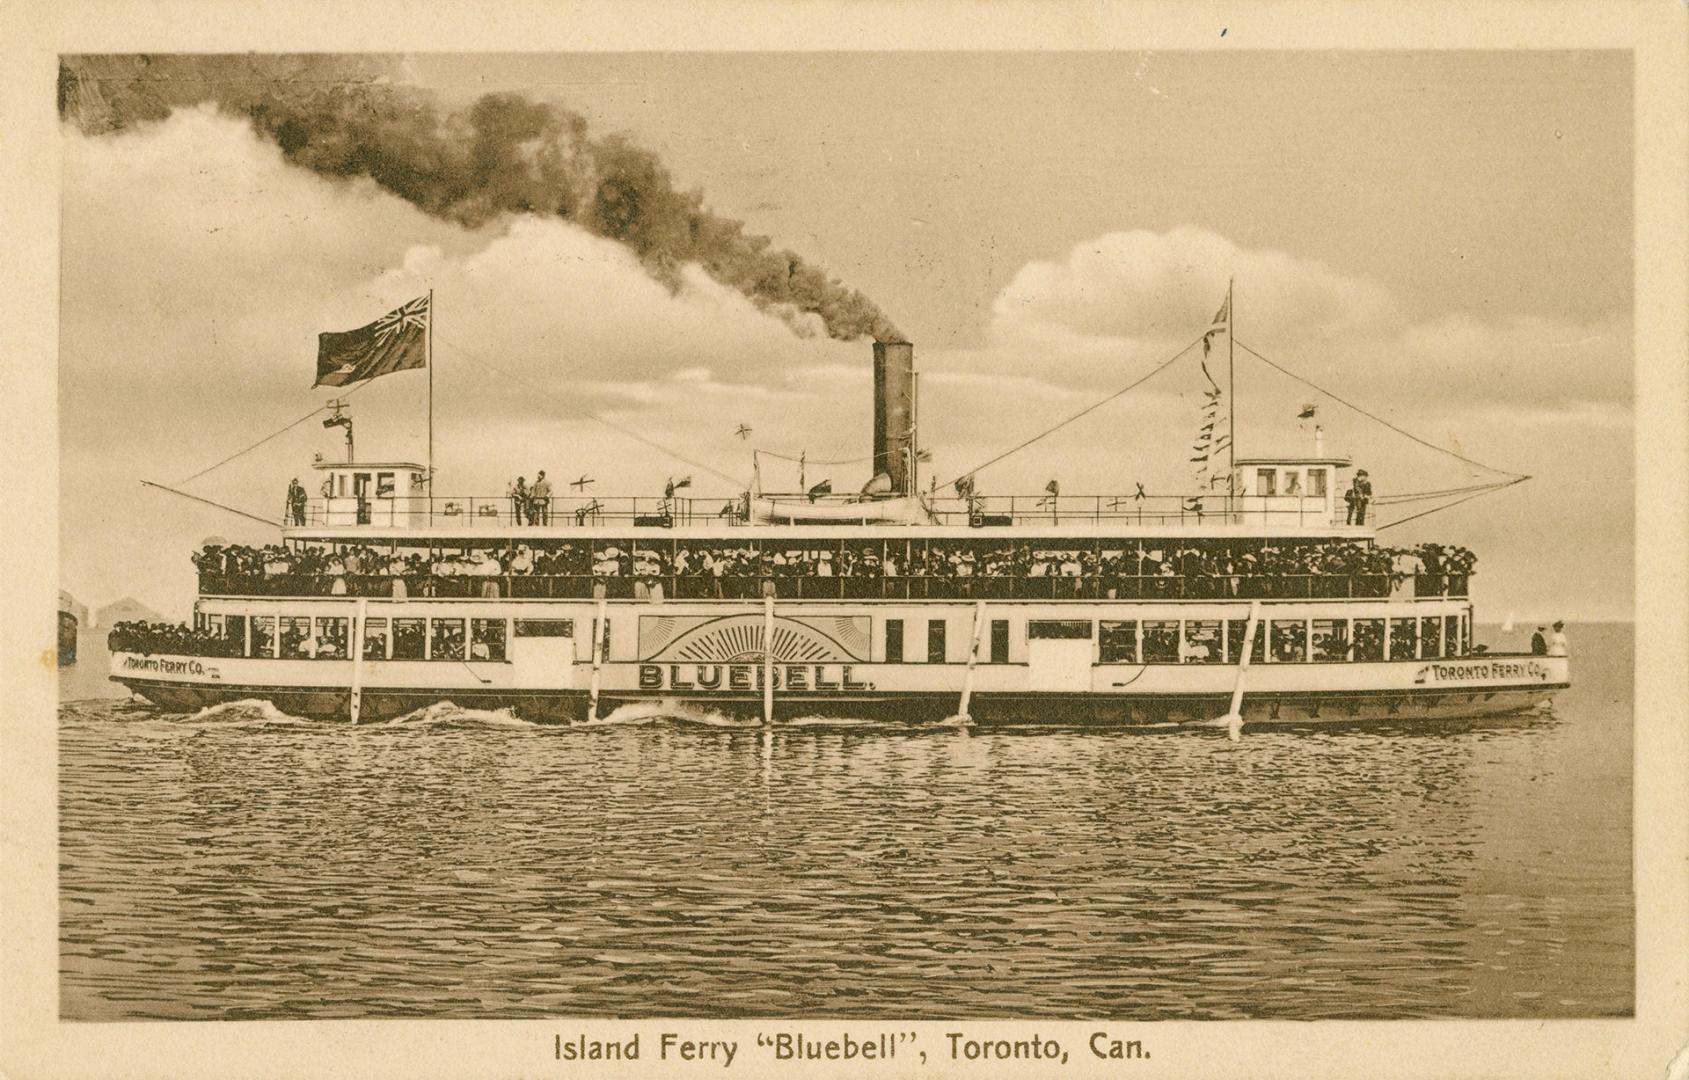 Image shows island ferry "Bluebell" on the lake.